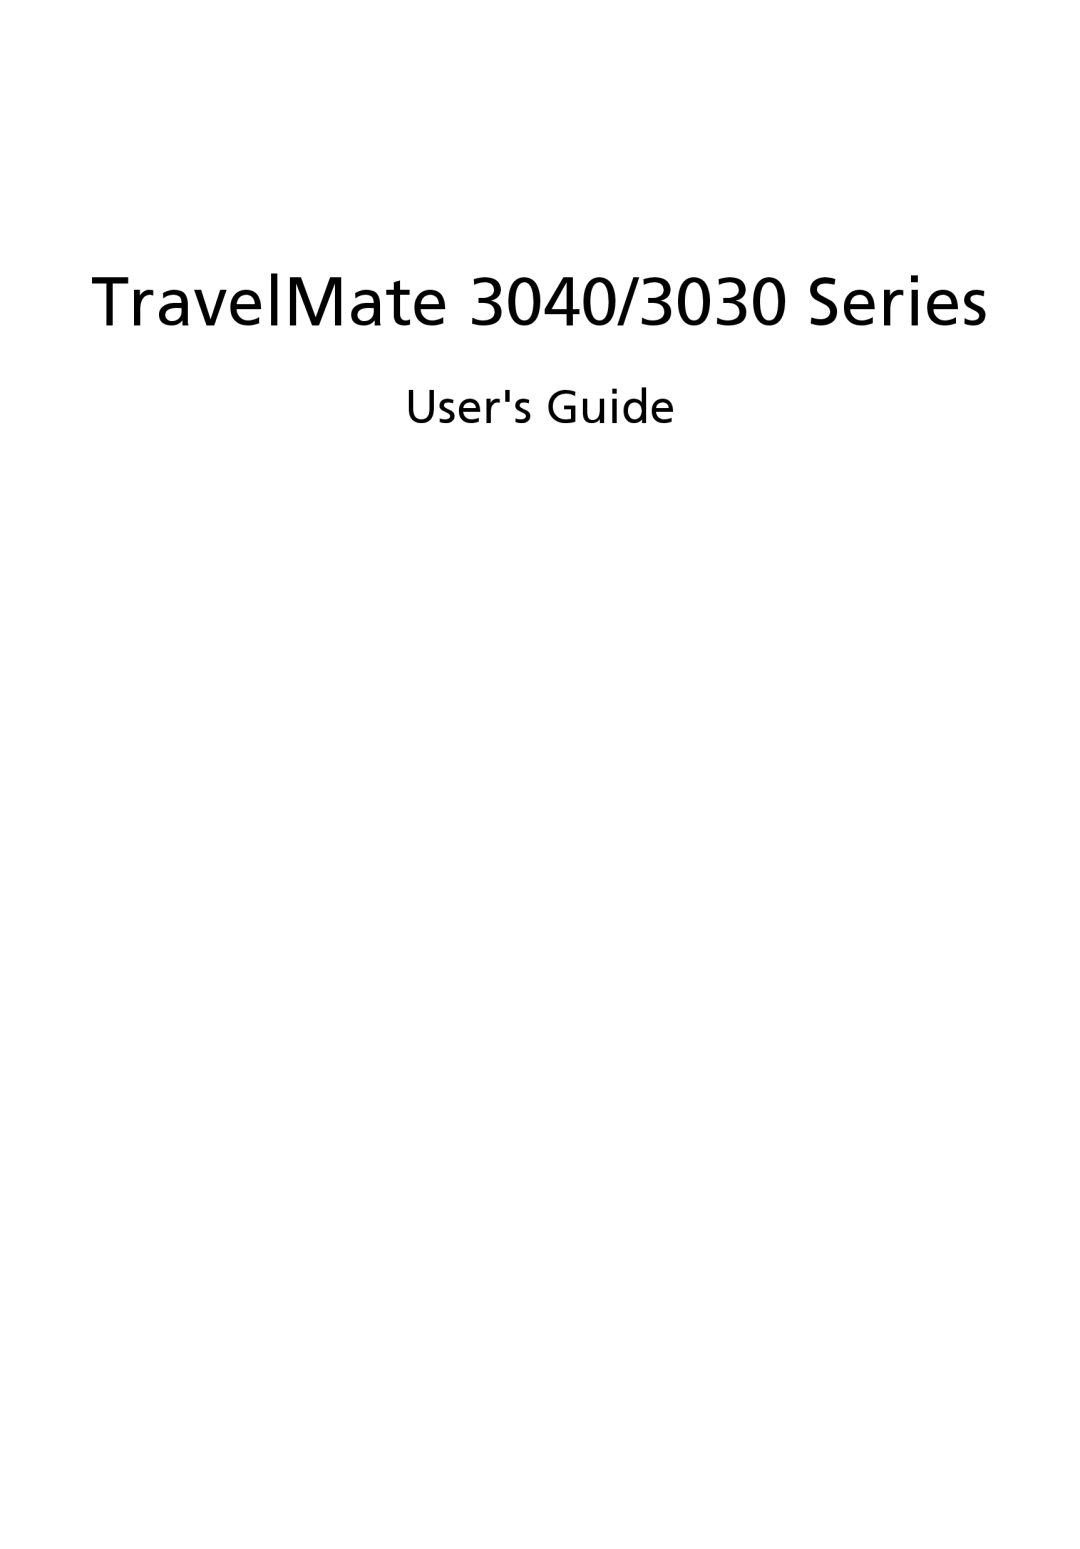 Acer 3040 Series manual Users Guide, TravelMate 3040/3030 Series 